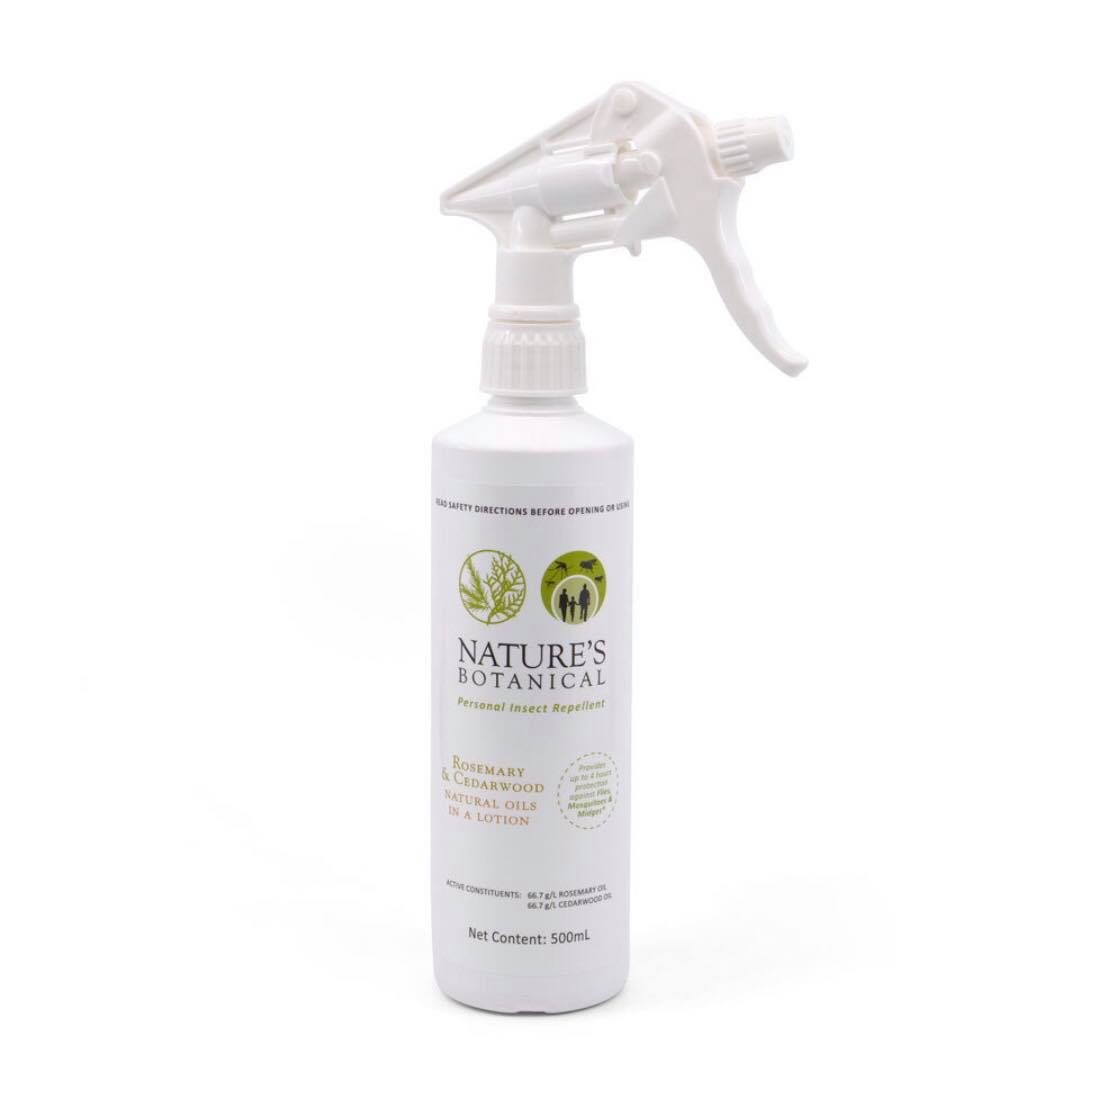 Nature's Botanical Personal Insect Repellent 500ml Spray